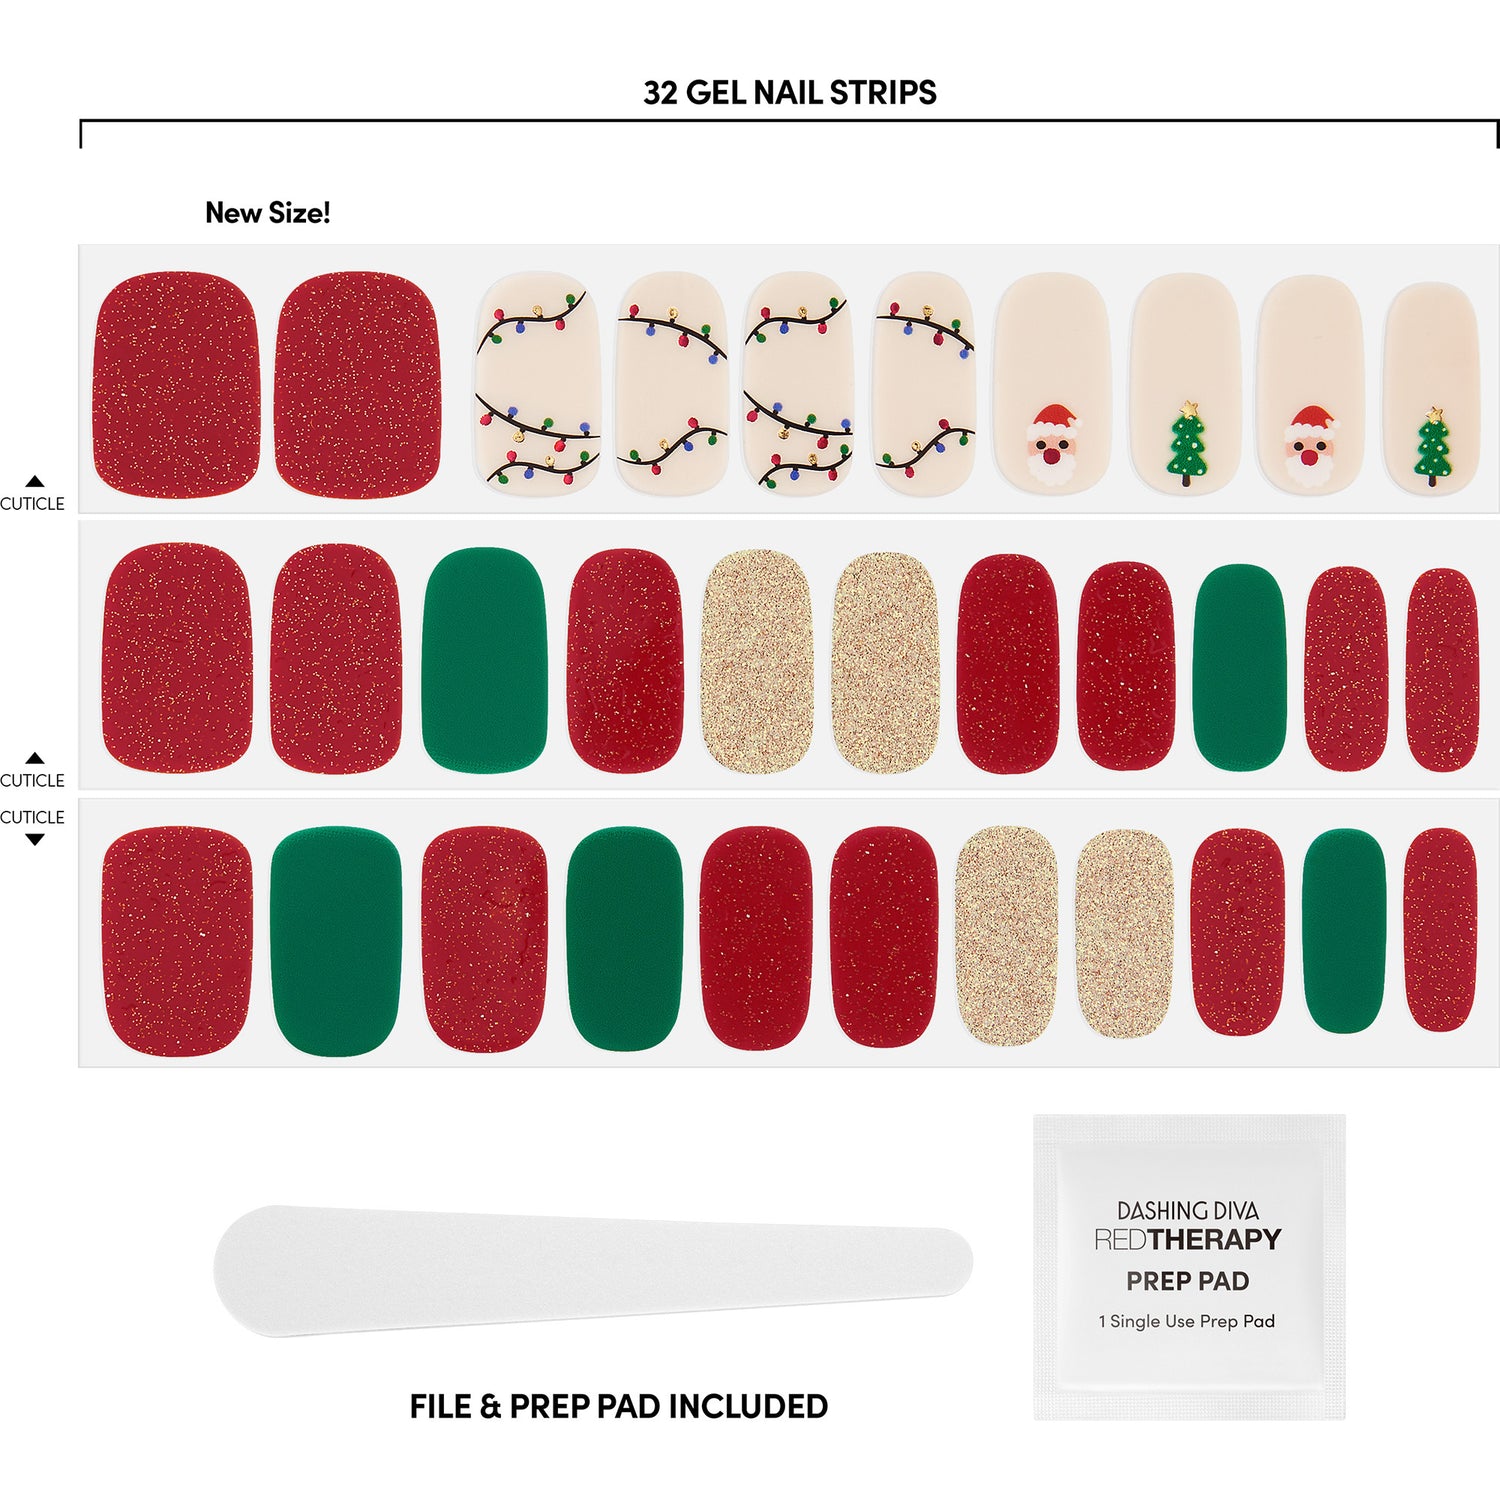 Solid green, solid sheer nude, glittered red, and glittered champagne nail strips featuring santa & tree icons and string light accents with a glossy, high-shine finish.